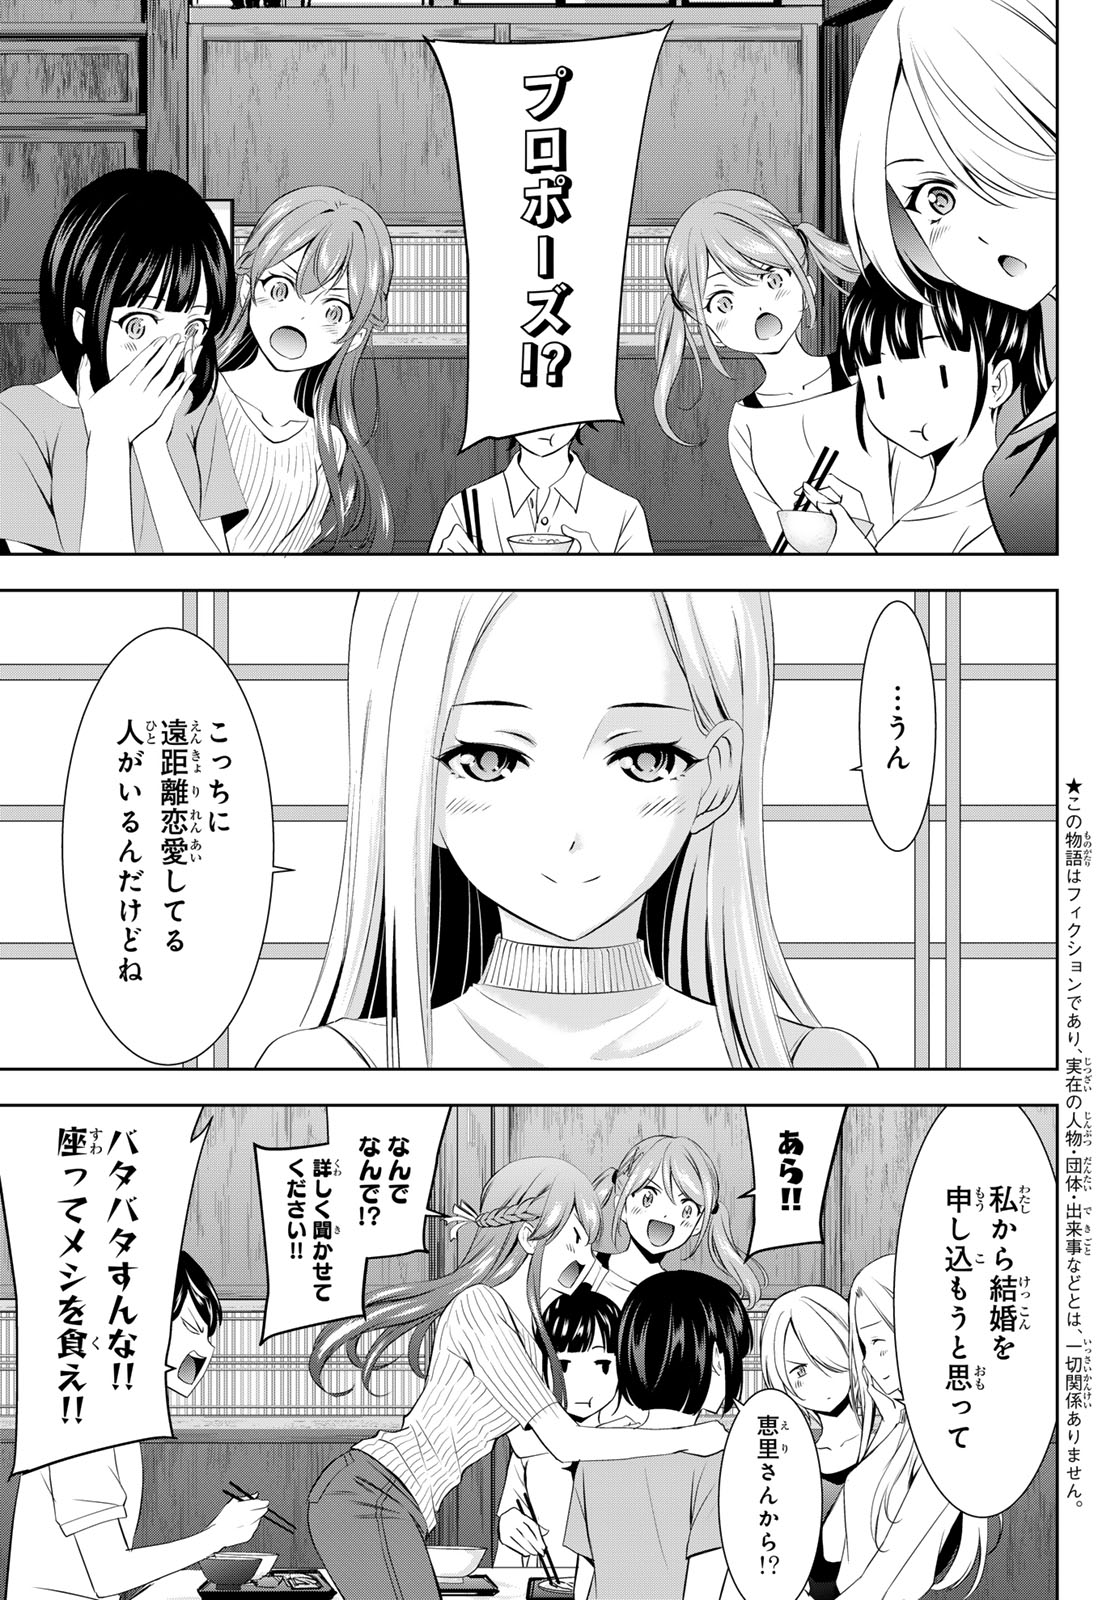 Megami no Cafe Terace - Chapter 151 - Page 4